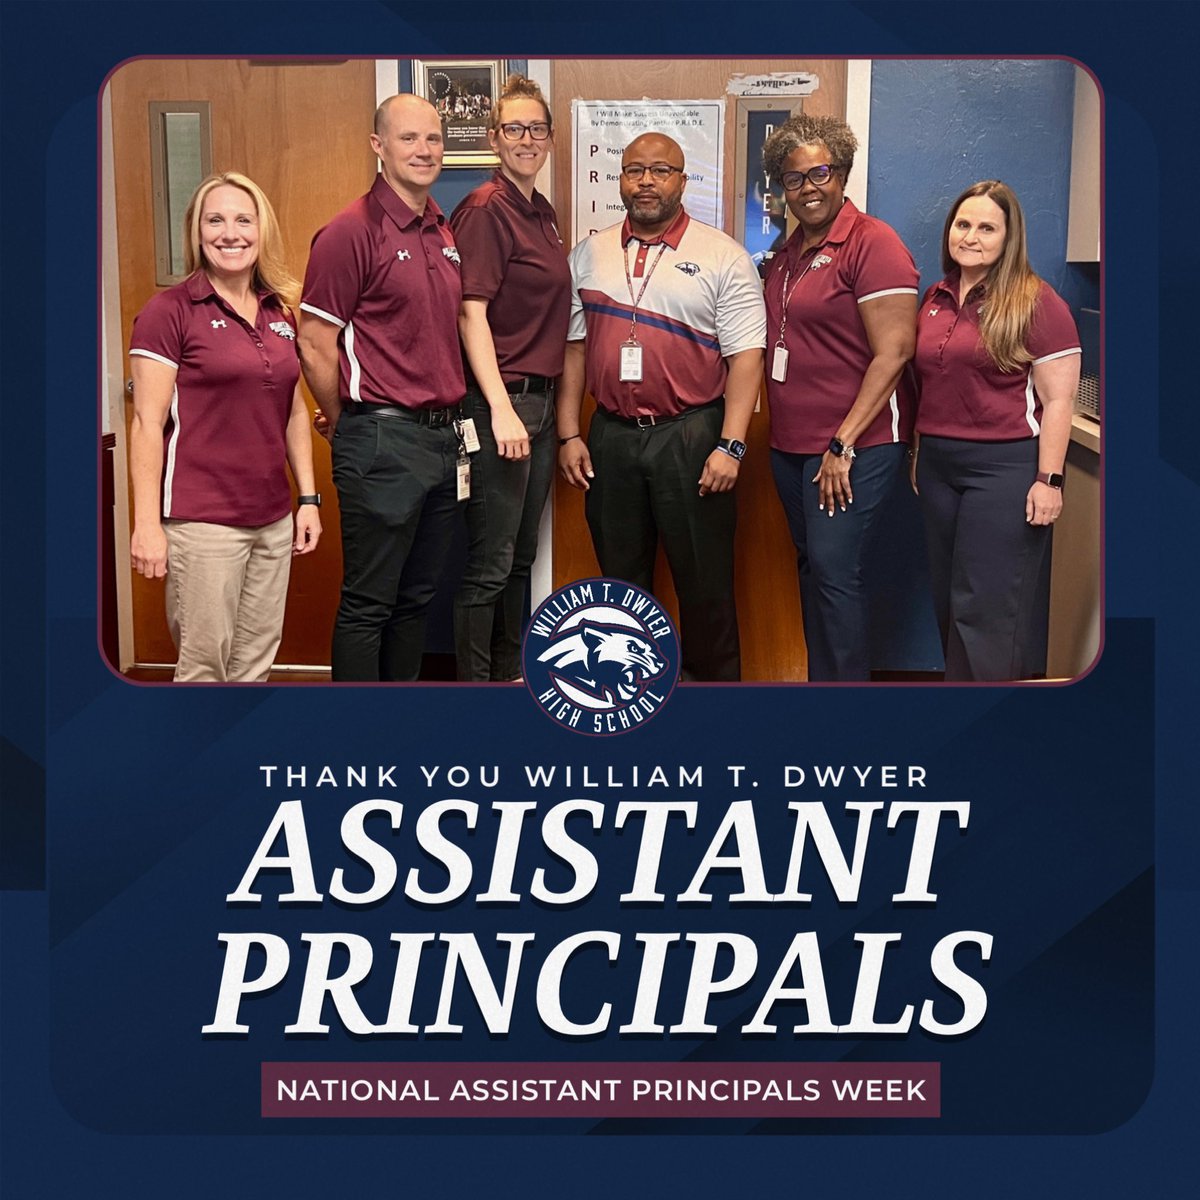 It is National Assistant Principals Week! Thank you Mrs. Farrell, Ms. Schneider, Ms. Wilkes, Ms. Winfrey, and Mr. Wojciechowsky for all you do in support of Dwyer High School! #WeAreDwyer #APWeek24